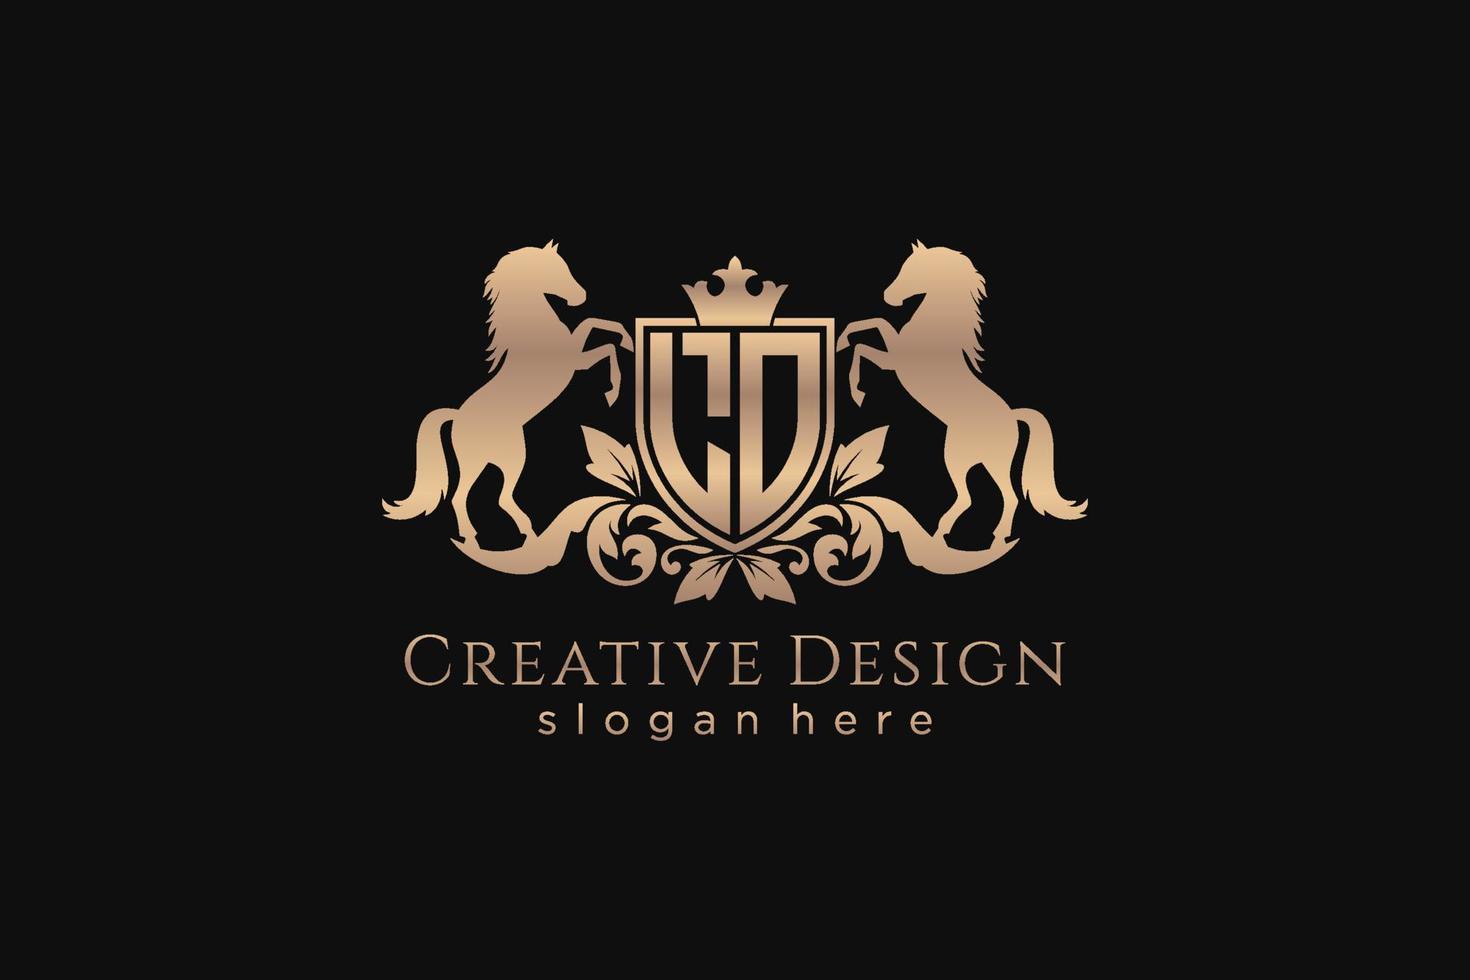 initial LO Retro golden crest with shield and two horses, badge template with scrolls and royal crown - perfect for luxurious branding projects vector